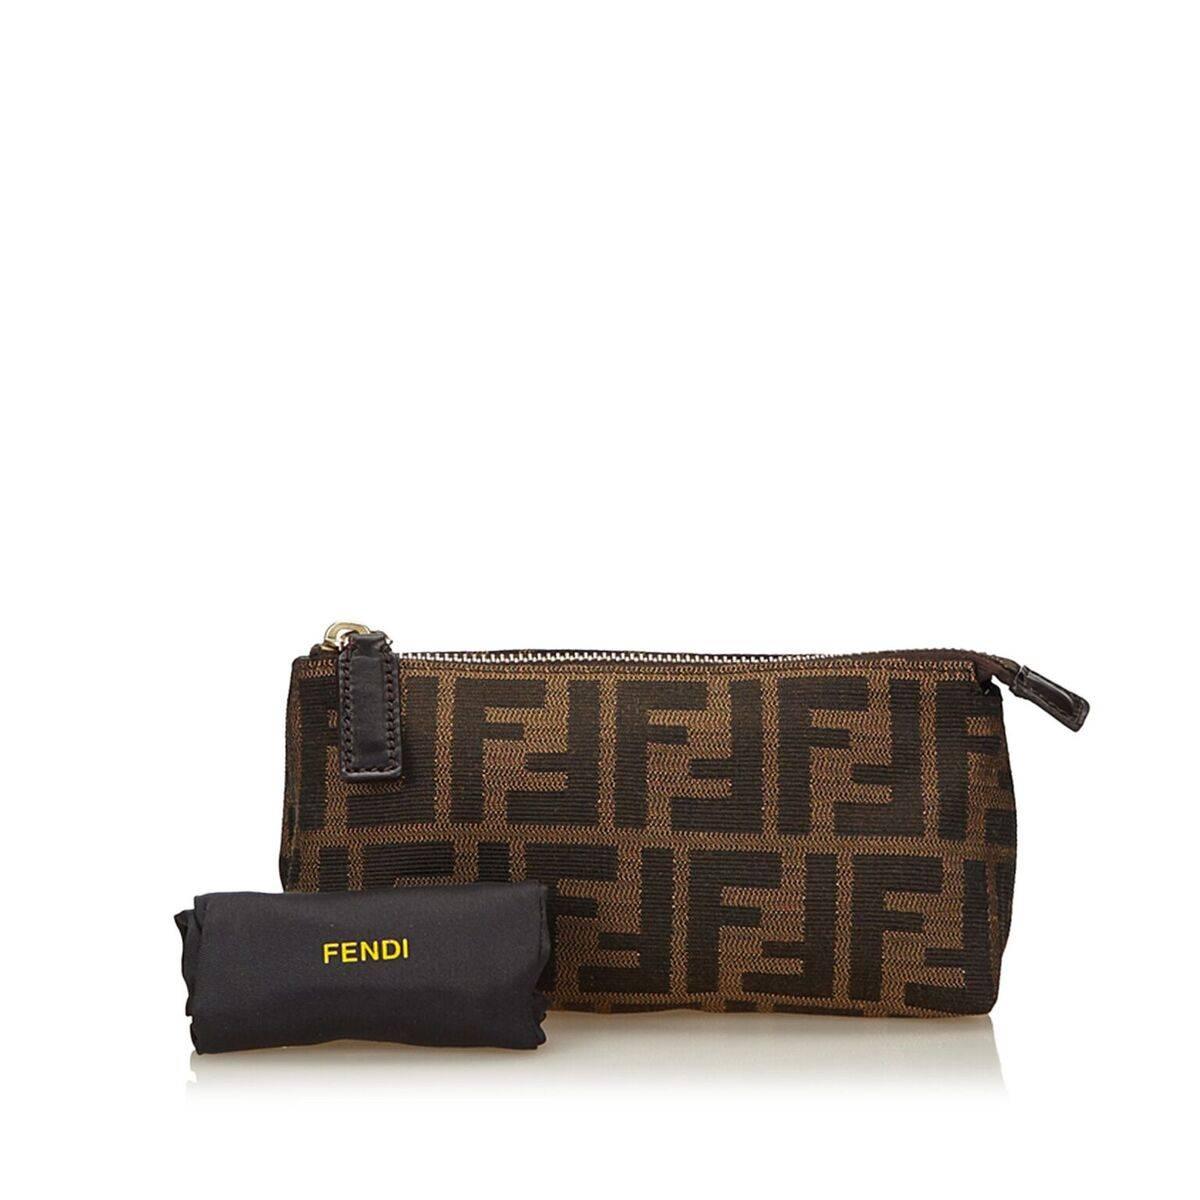 Product details:  Brown Zucca jacquard pouch by Fendi.  Top zip closure.  Lined interior.  Goldtone hardware.  Dust bag included.  7